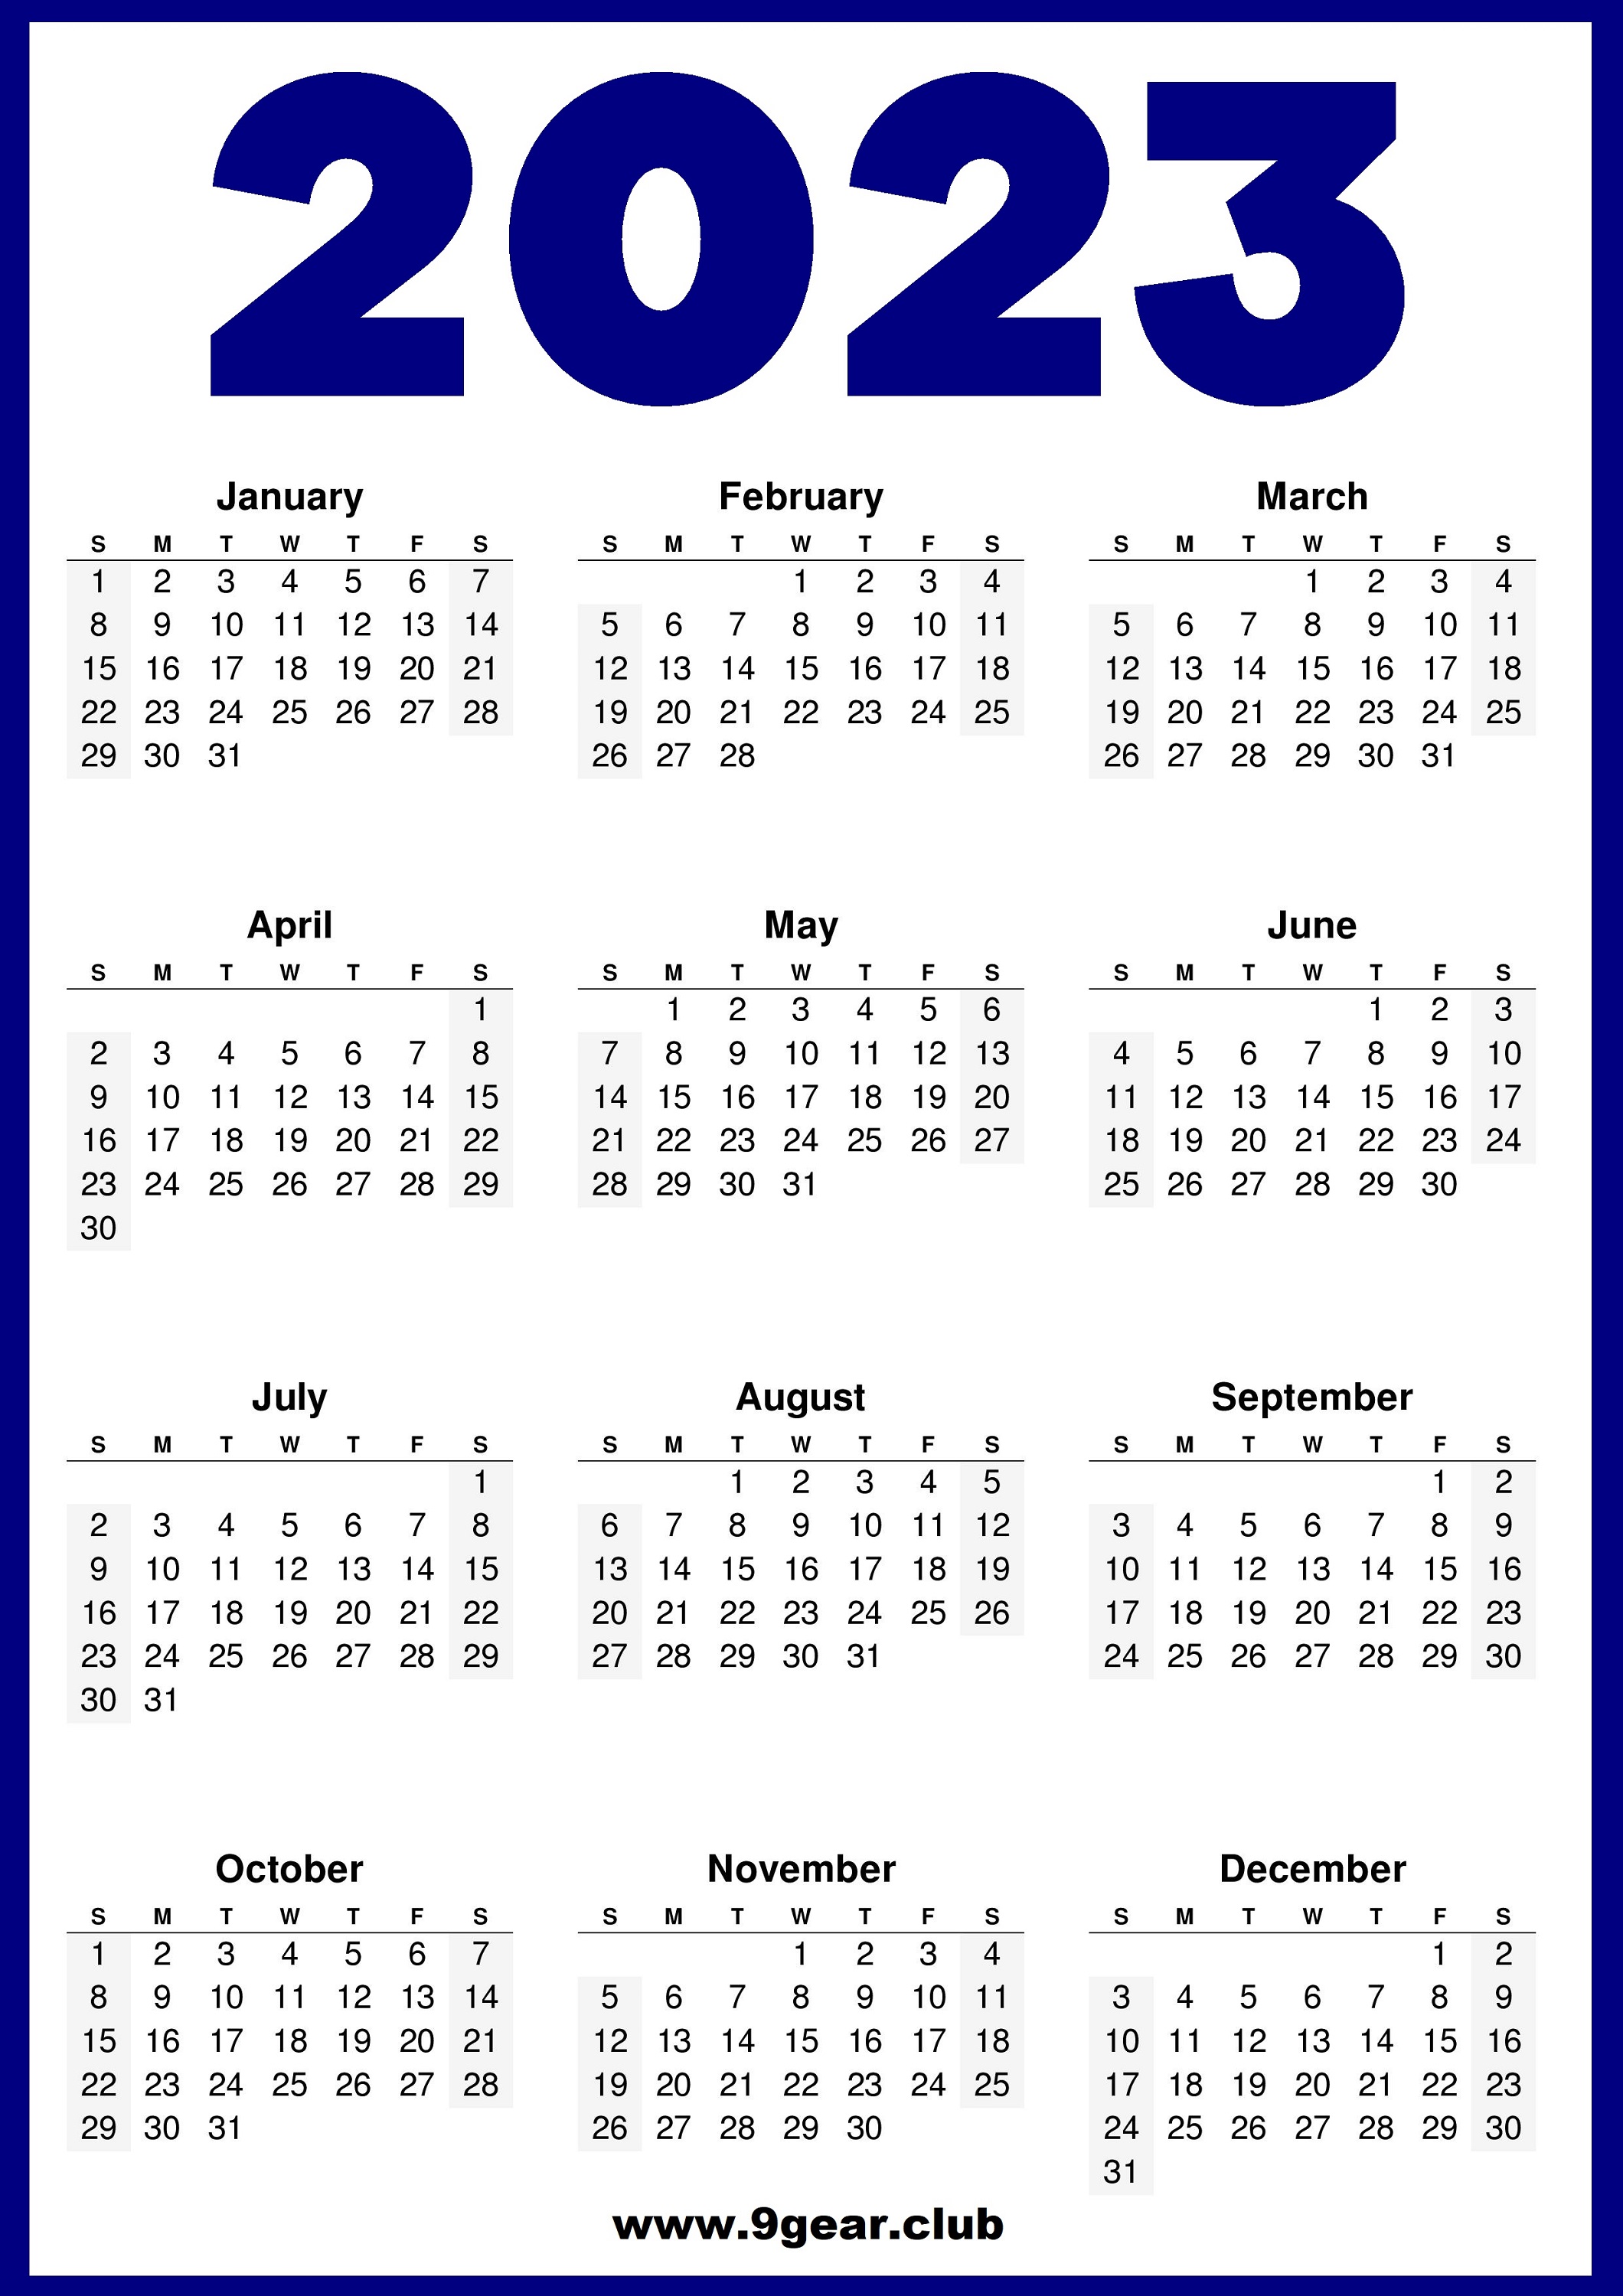 2023 calendar templates and images - printable 2023 calendar one page ...